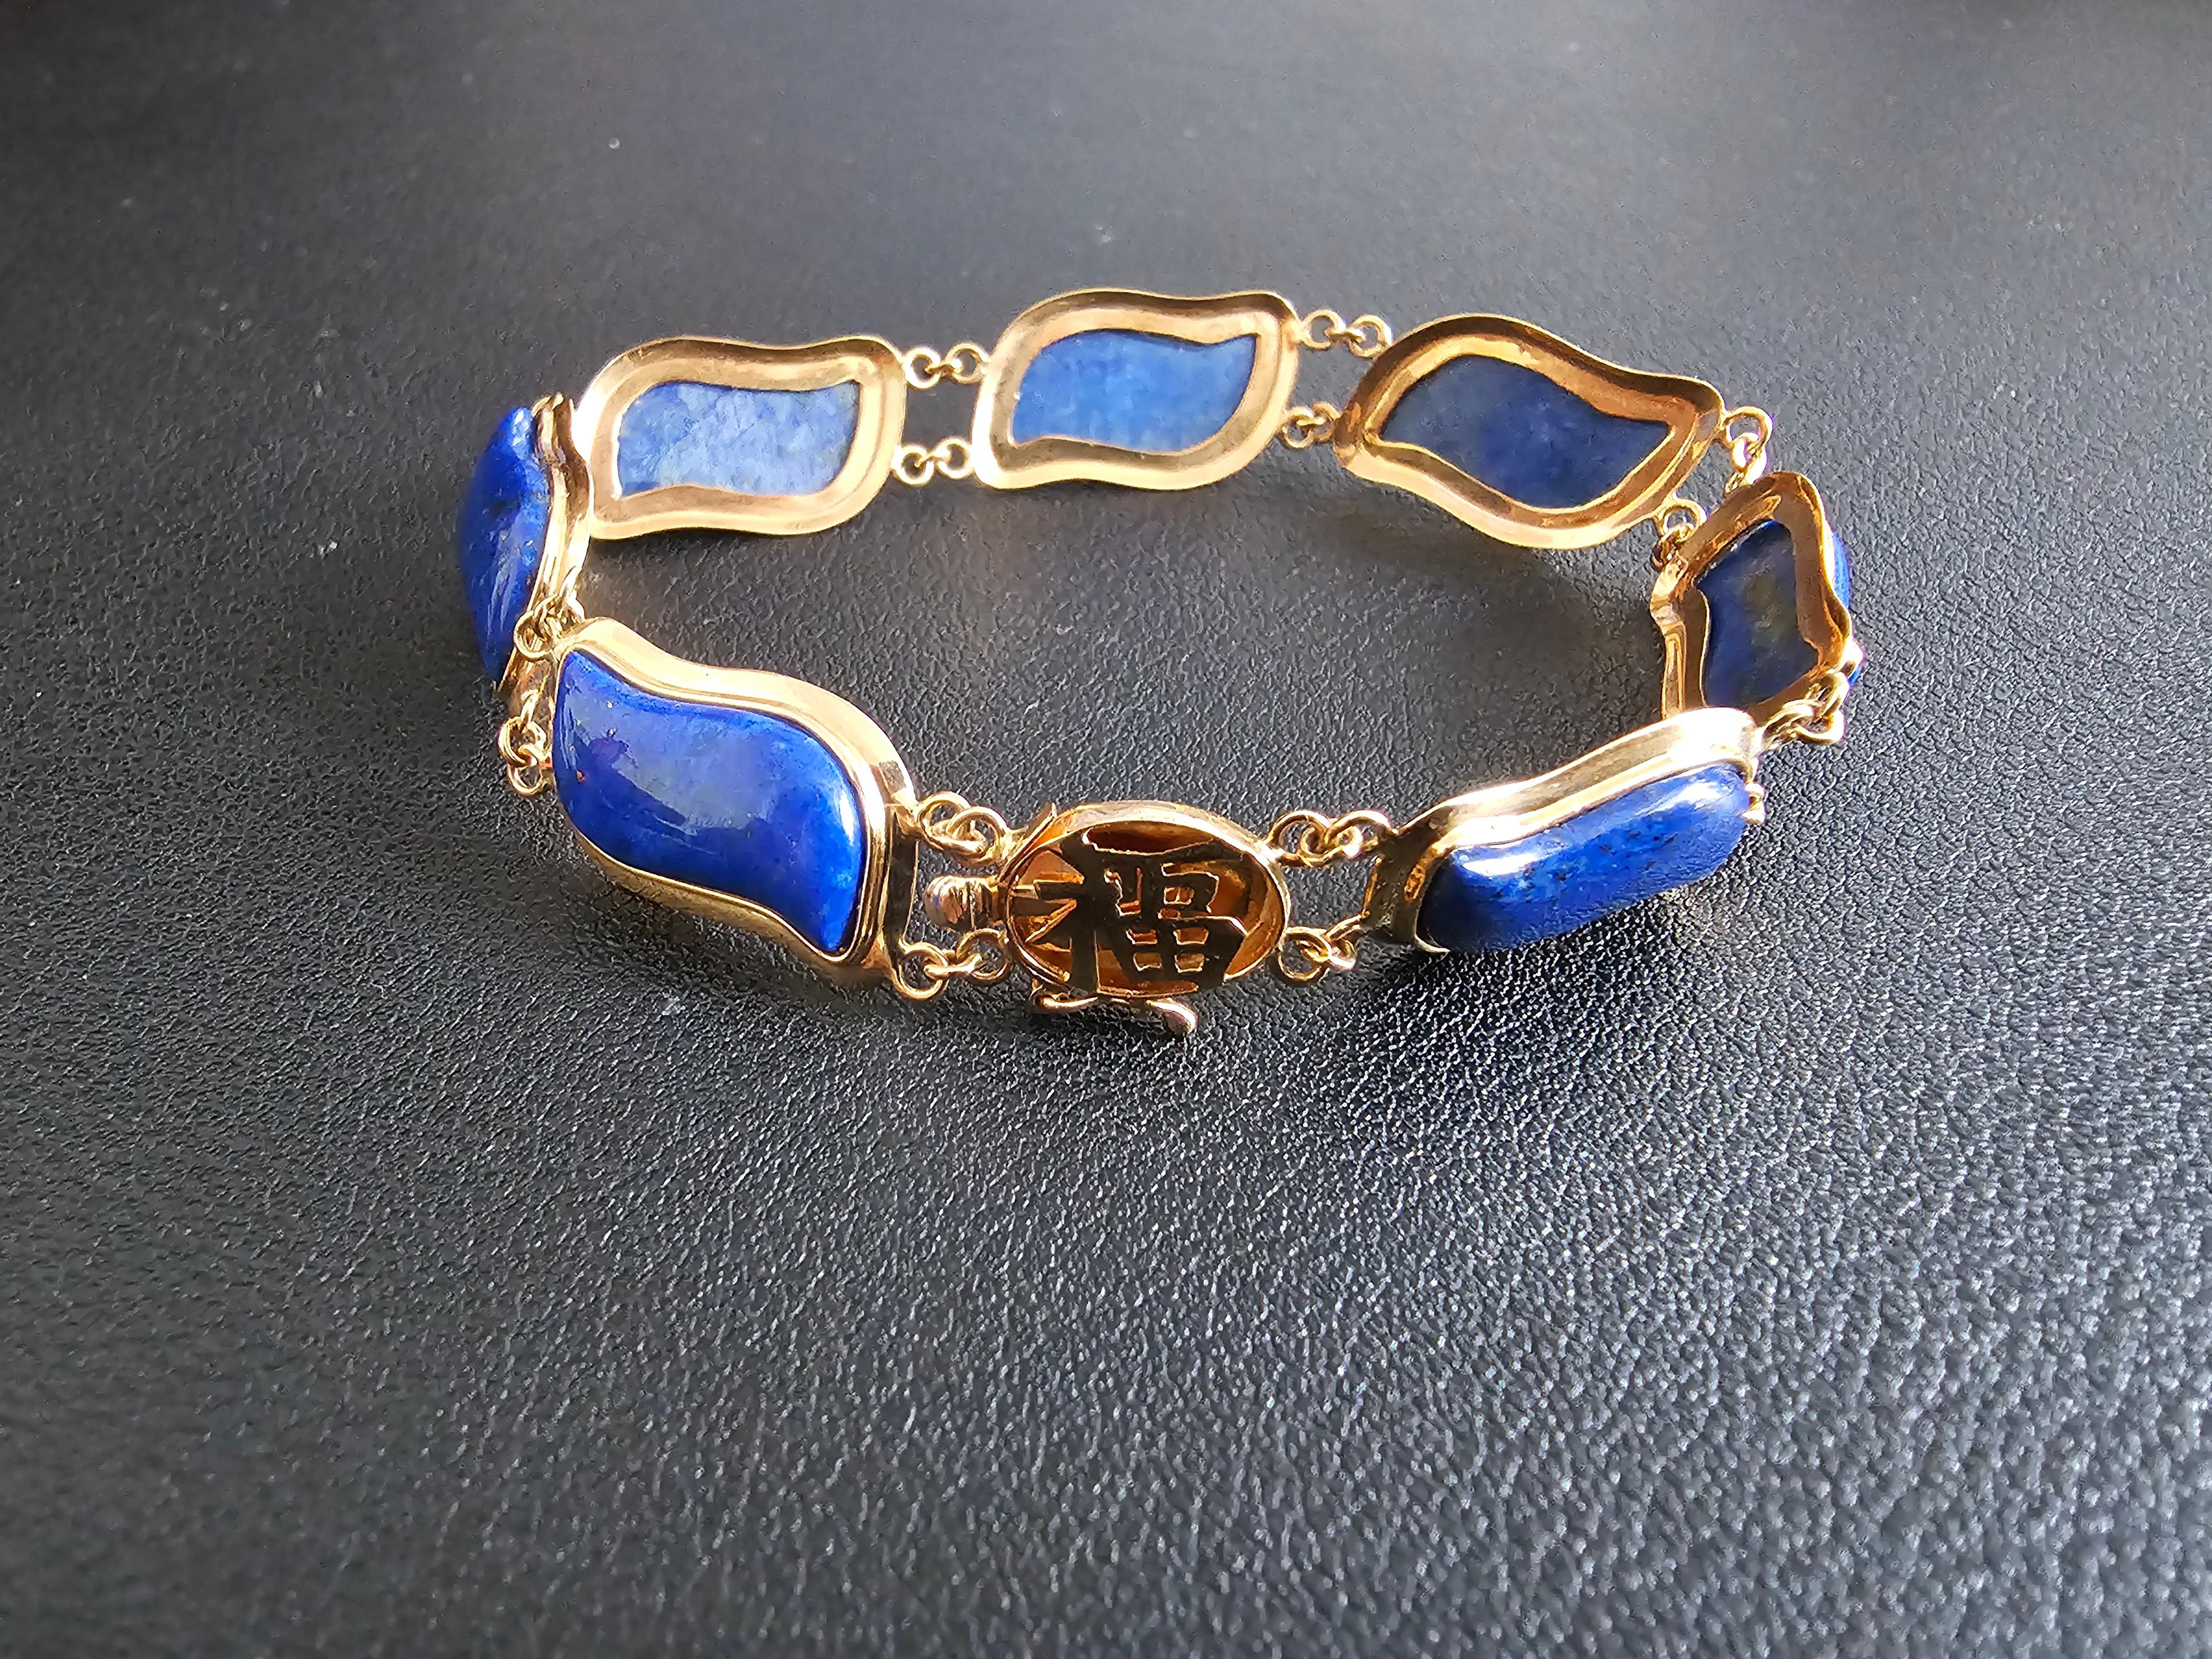 Blue Lapis Lazuli Bracelet Aurora Double Chained with 14K Solid Yellow Gold For Sale 2